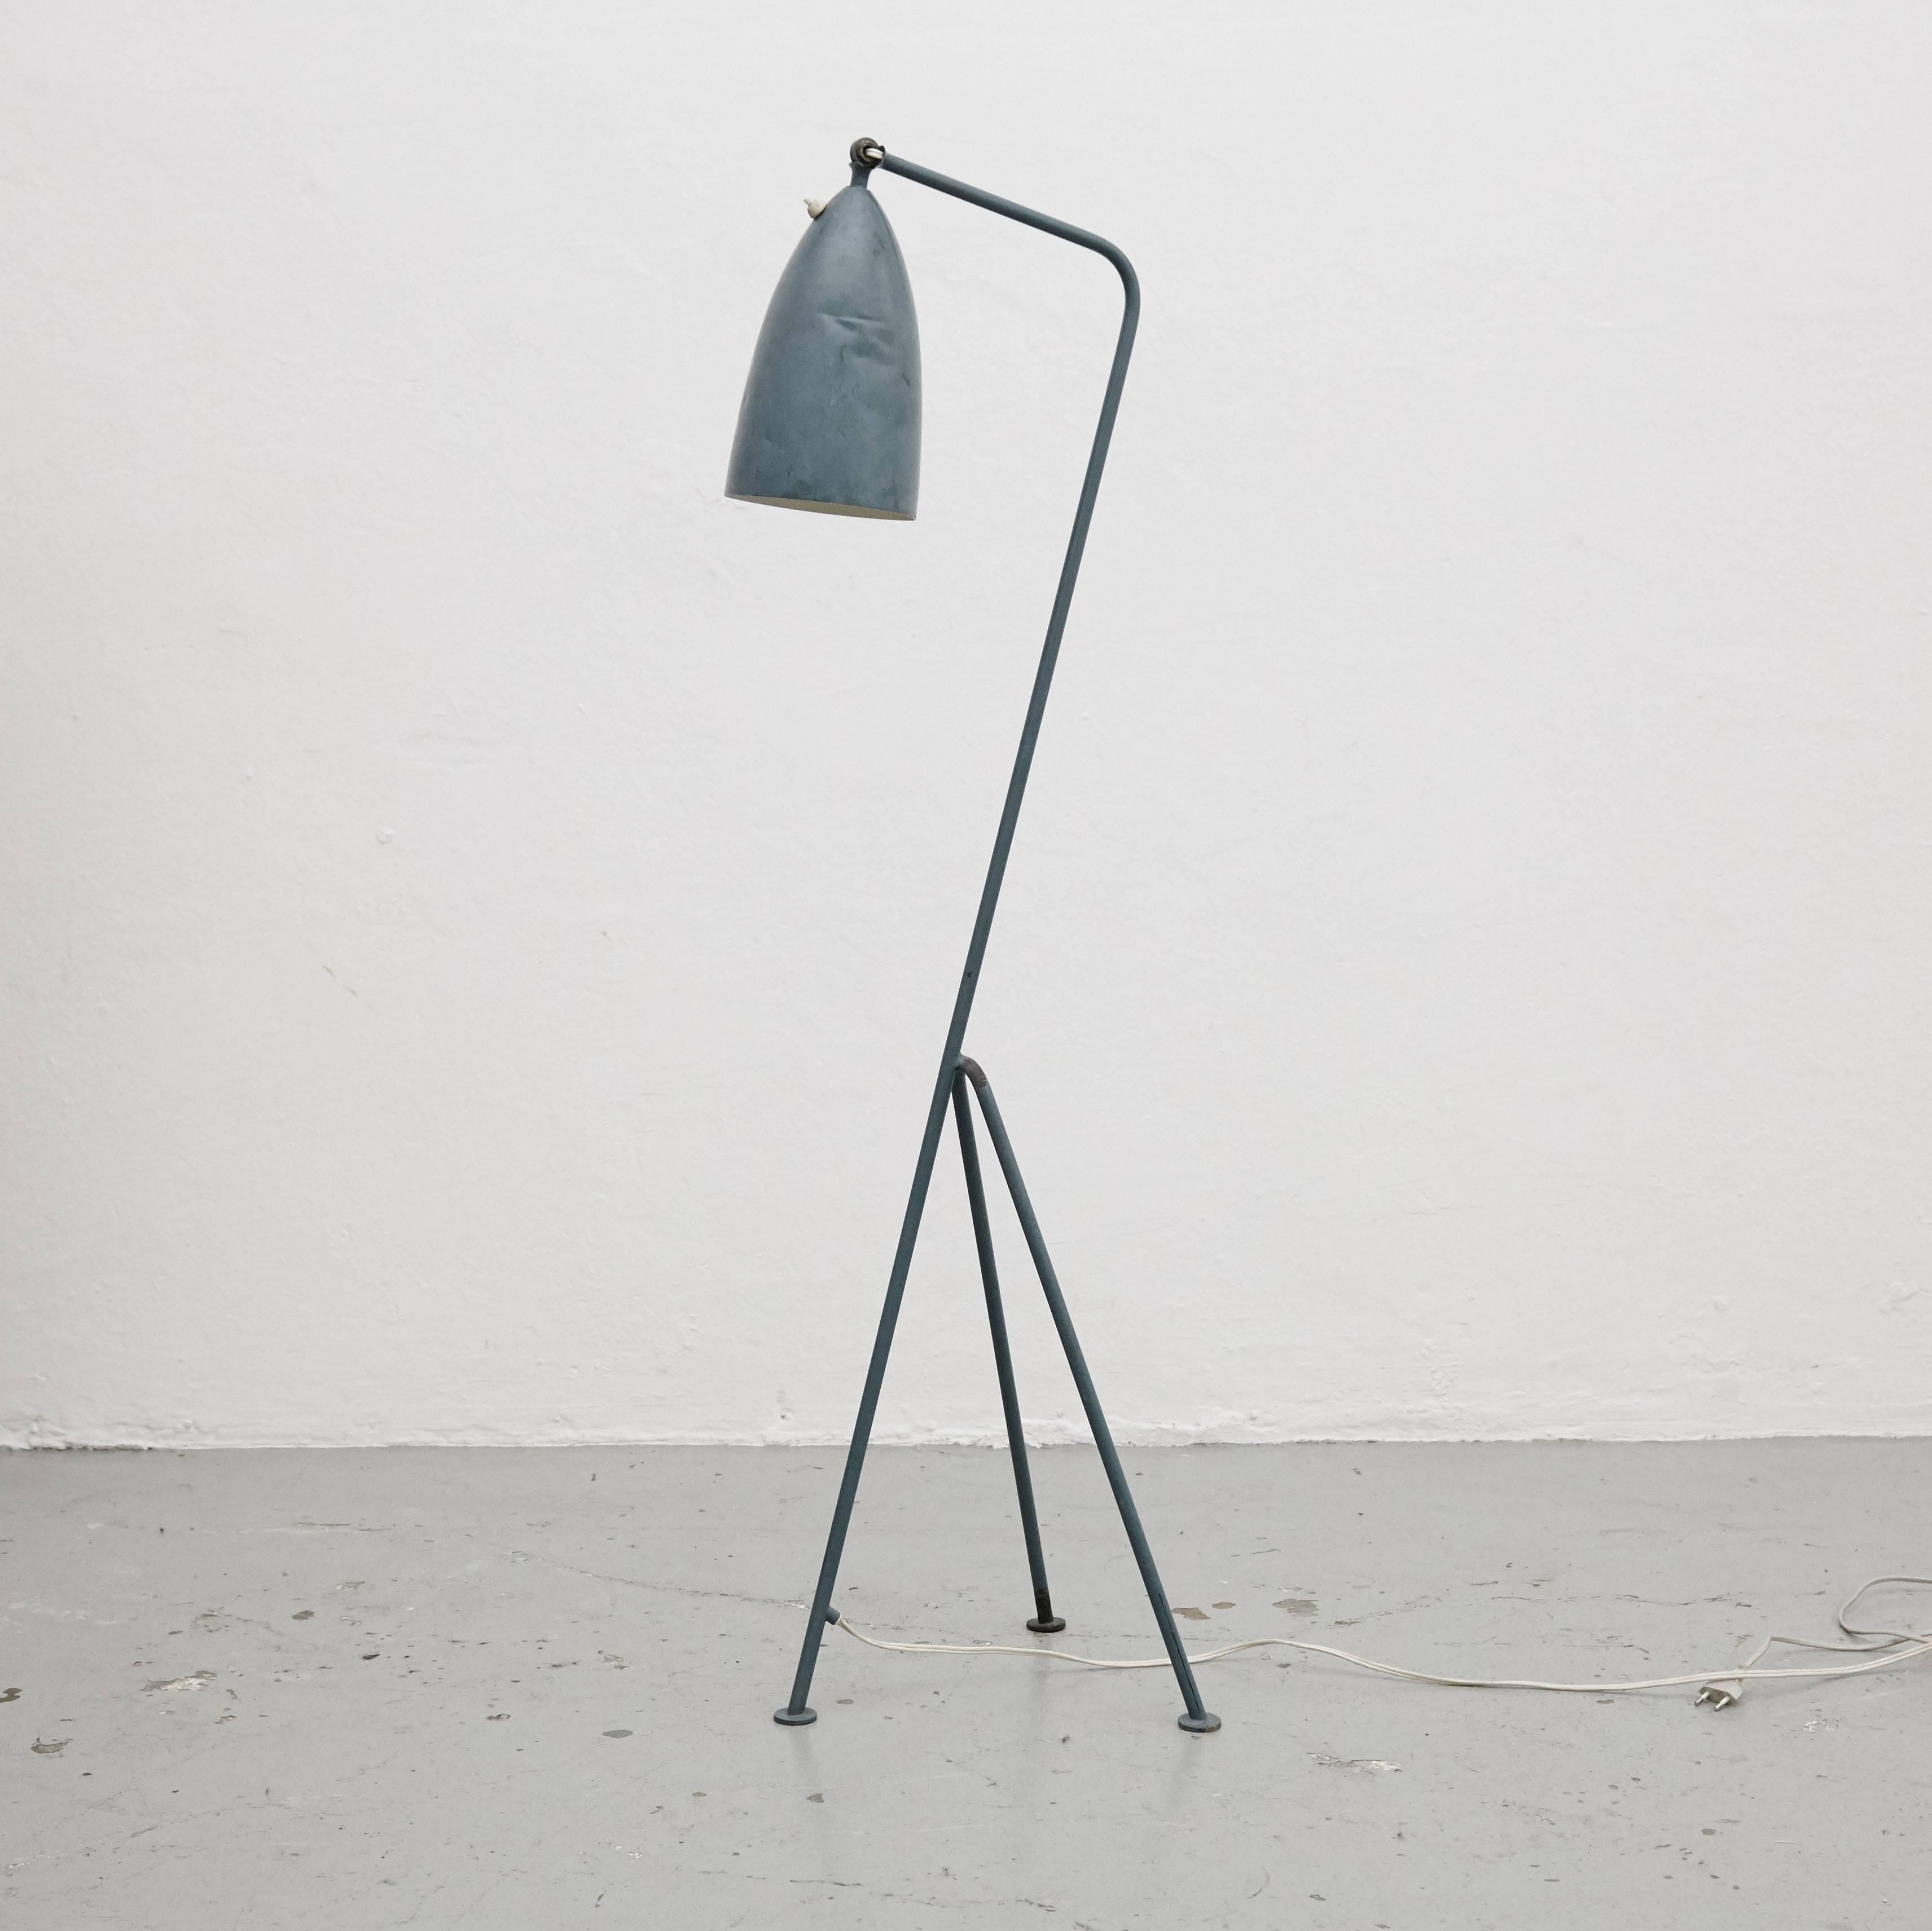 Floor lamp designed by Greta Magnusson Grossman in Sweden, circa 1947.

In original condition, with minor wear consistent with age and use, preserving a beautiful patina.

Greta Magnusson-Grossman (July 21, 1906-August 1999) was a Swedish